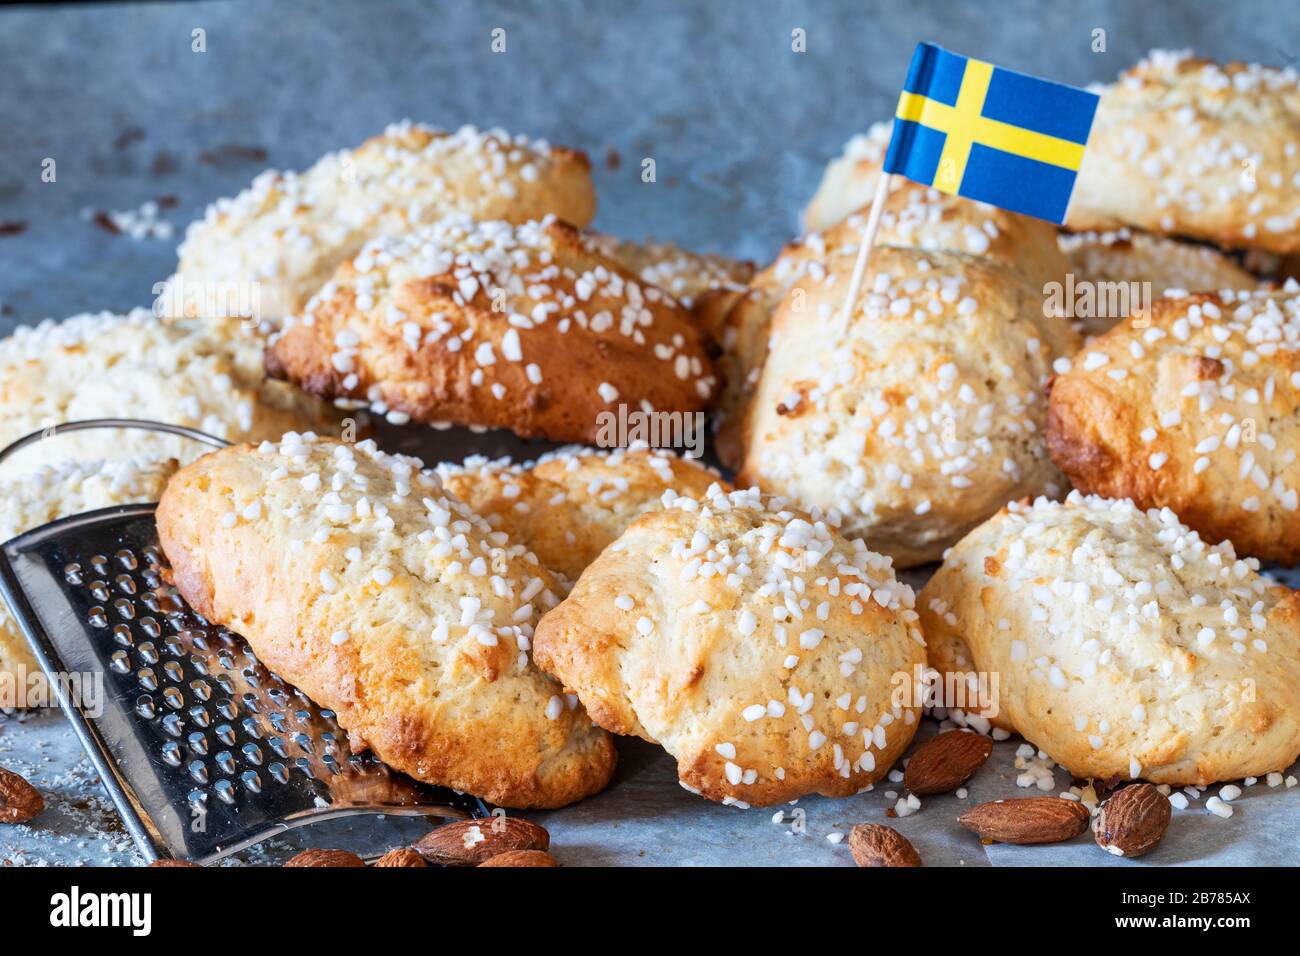 Swedish fika, swedish soft almond cookies mandelkubb with a swedish flag. There is a grater and almonds ascattered around the buns. Stock Photo